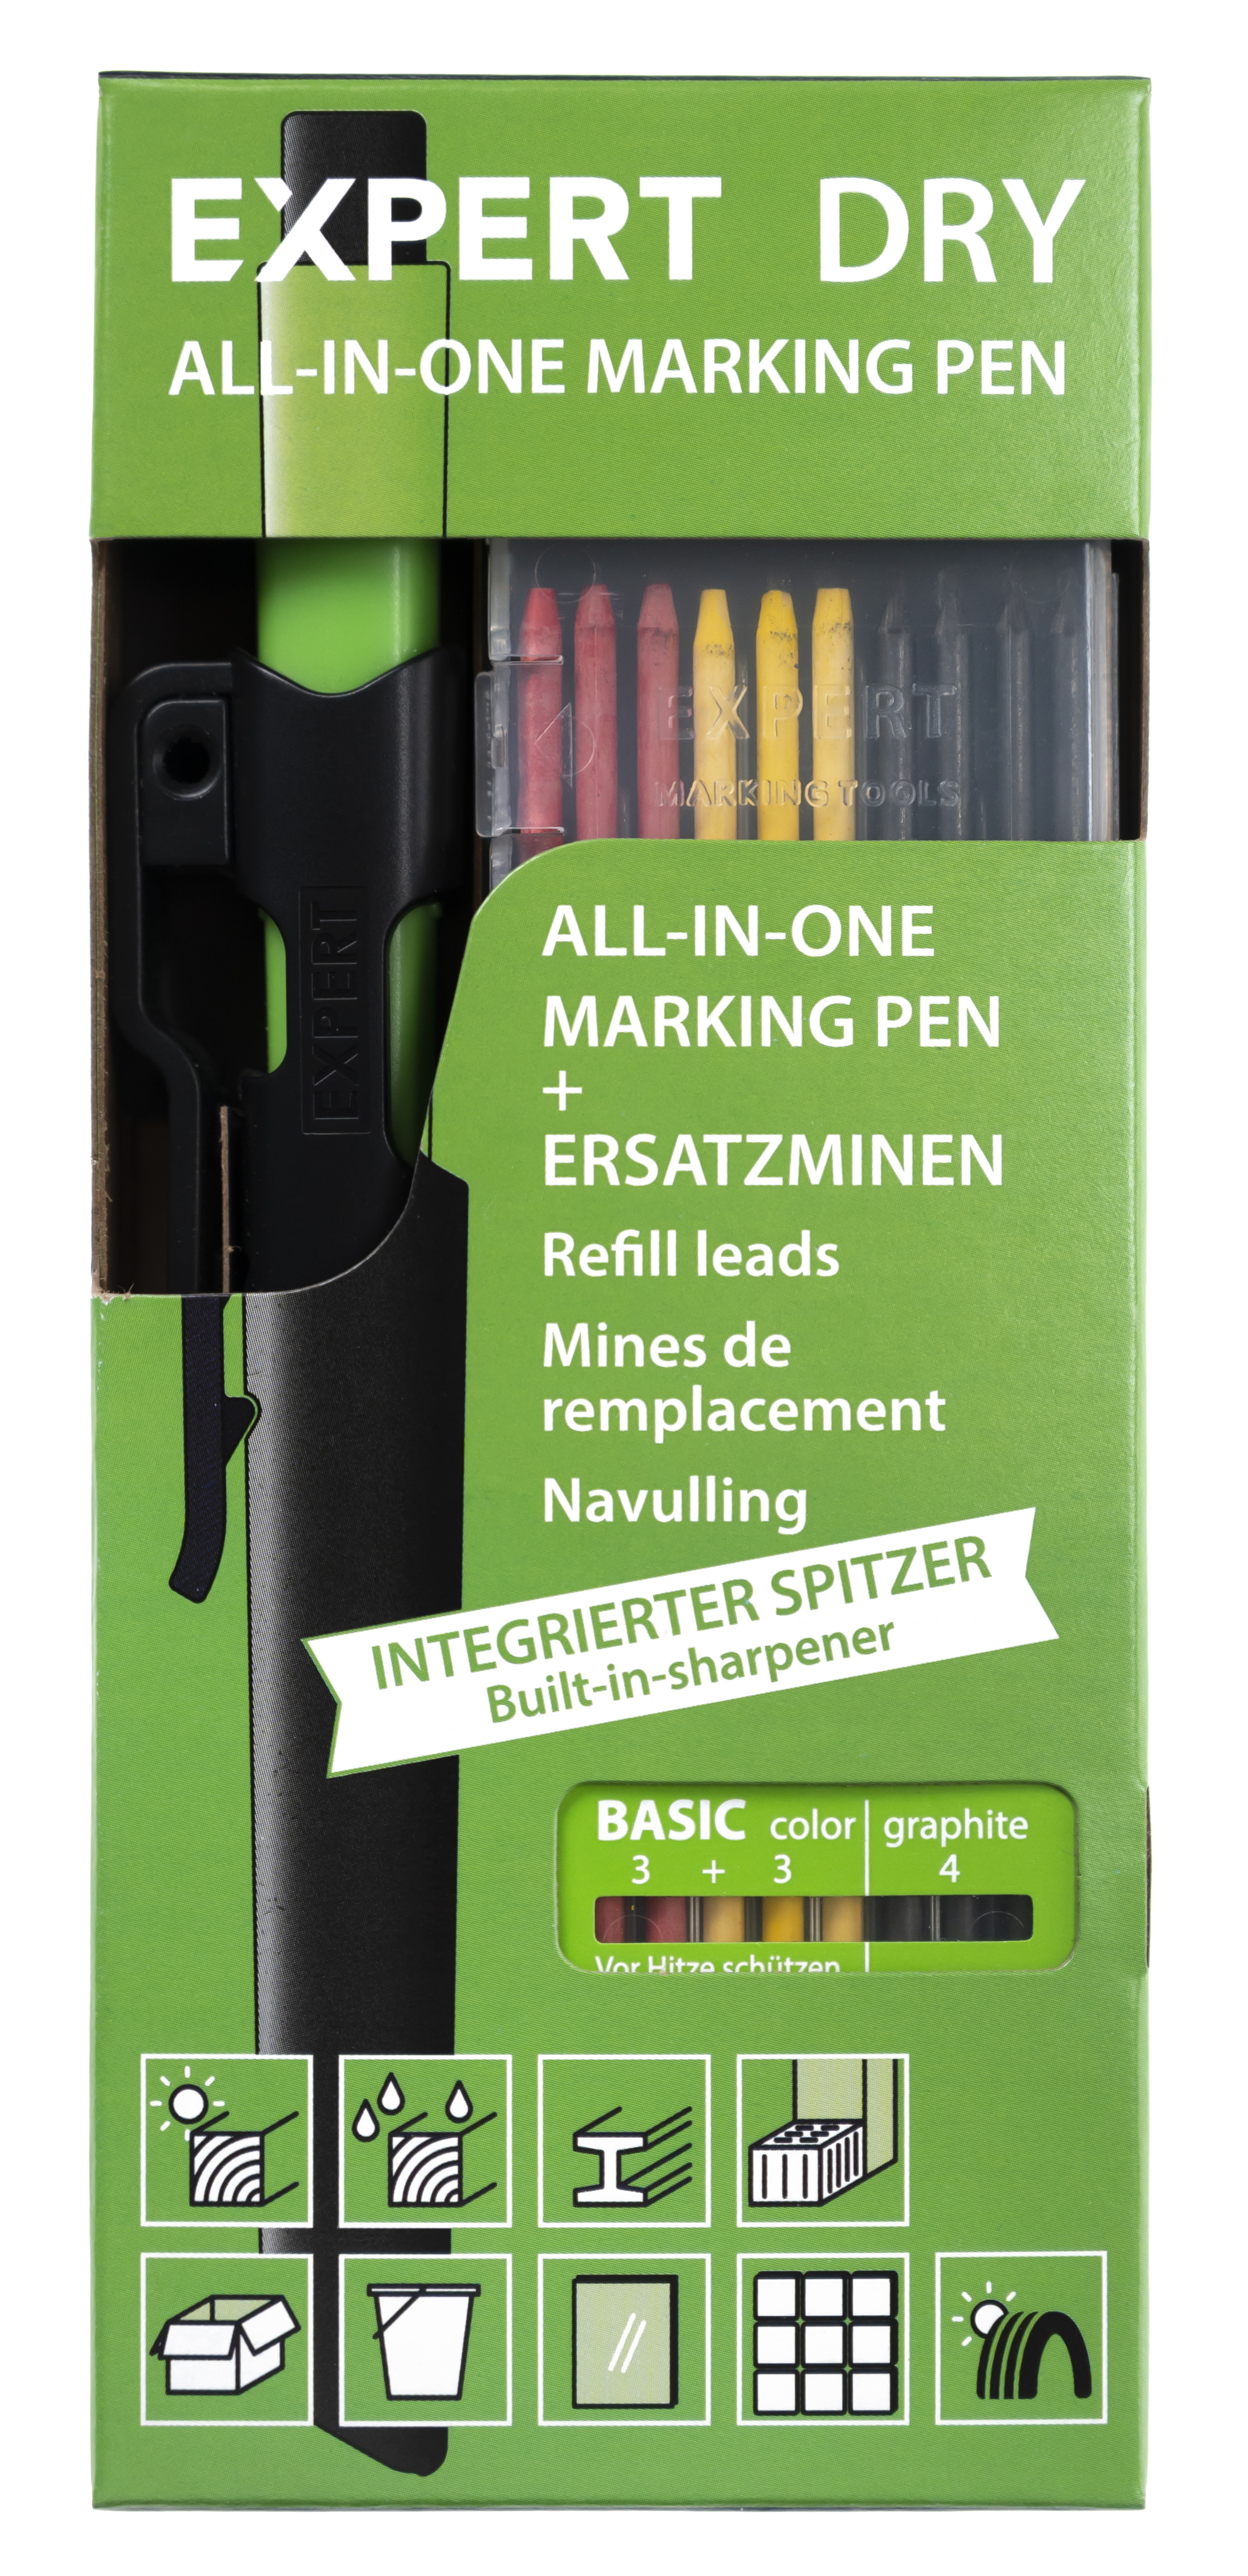 EXPERT DRY ALL-IN-ONE with Basic-Mine-Set